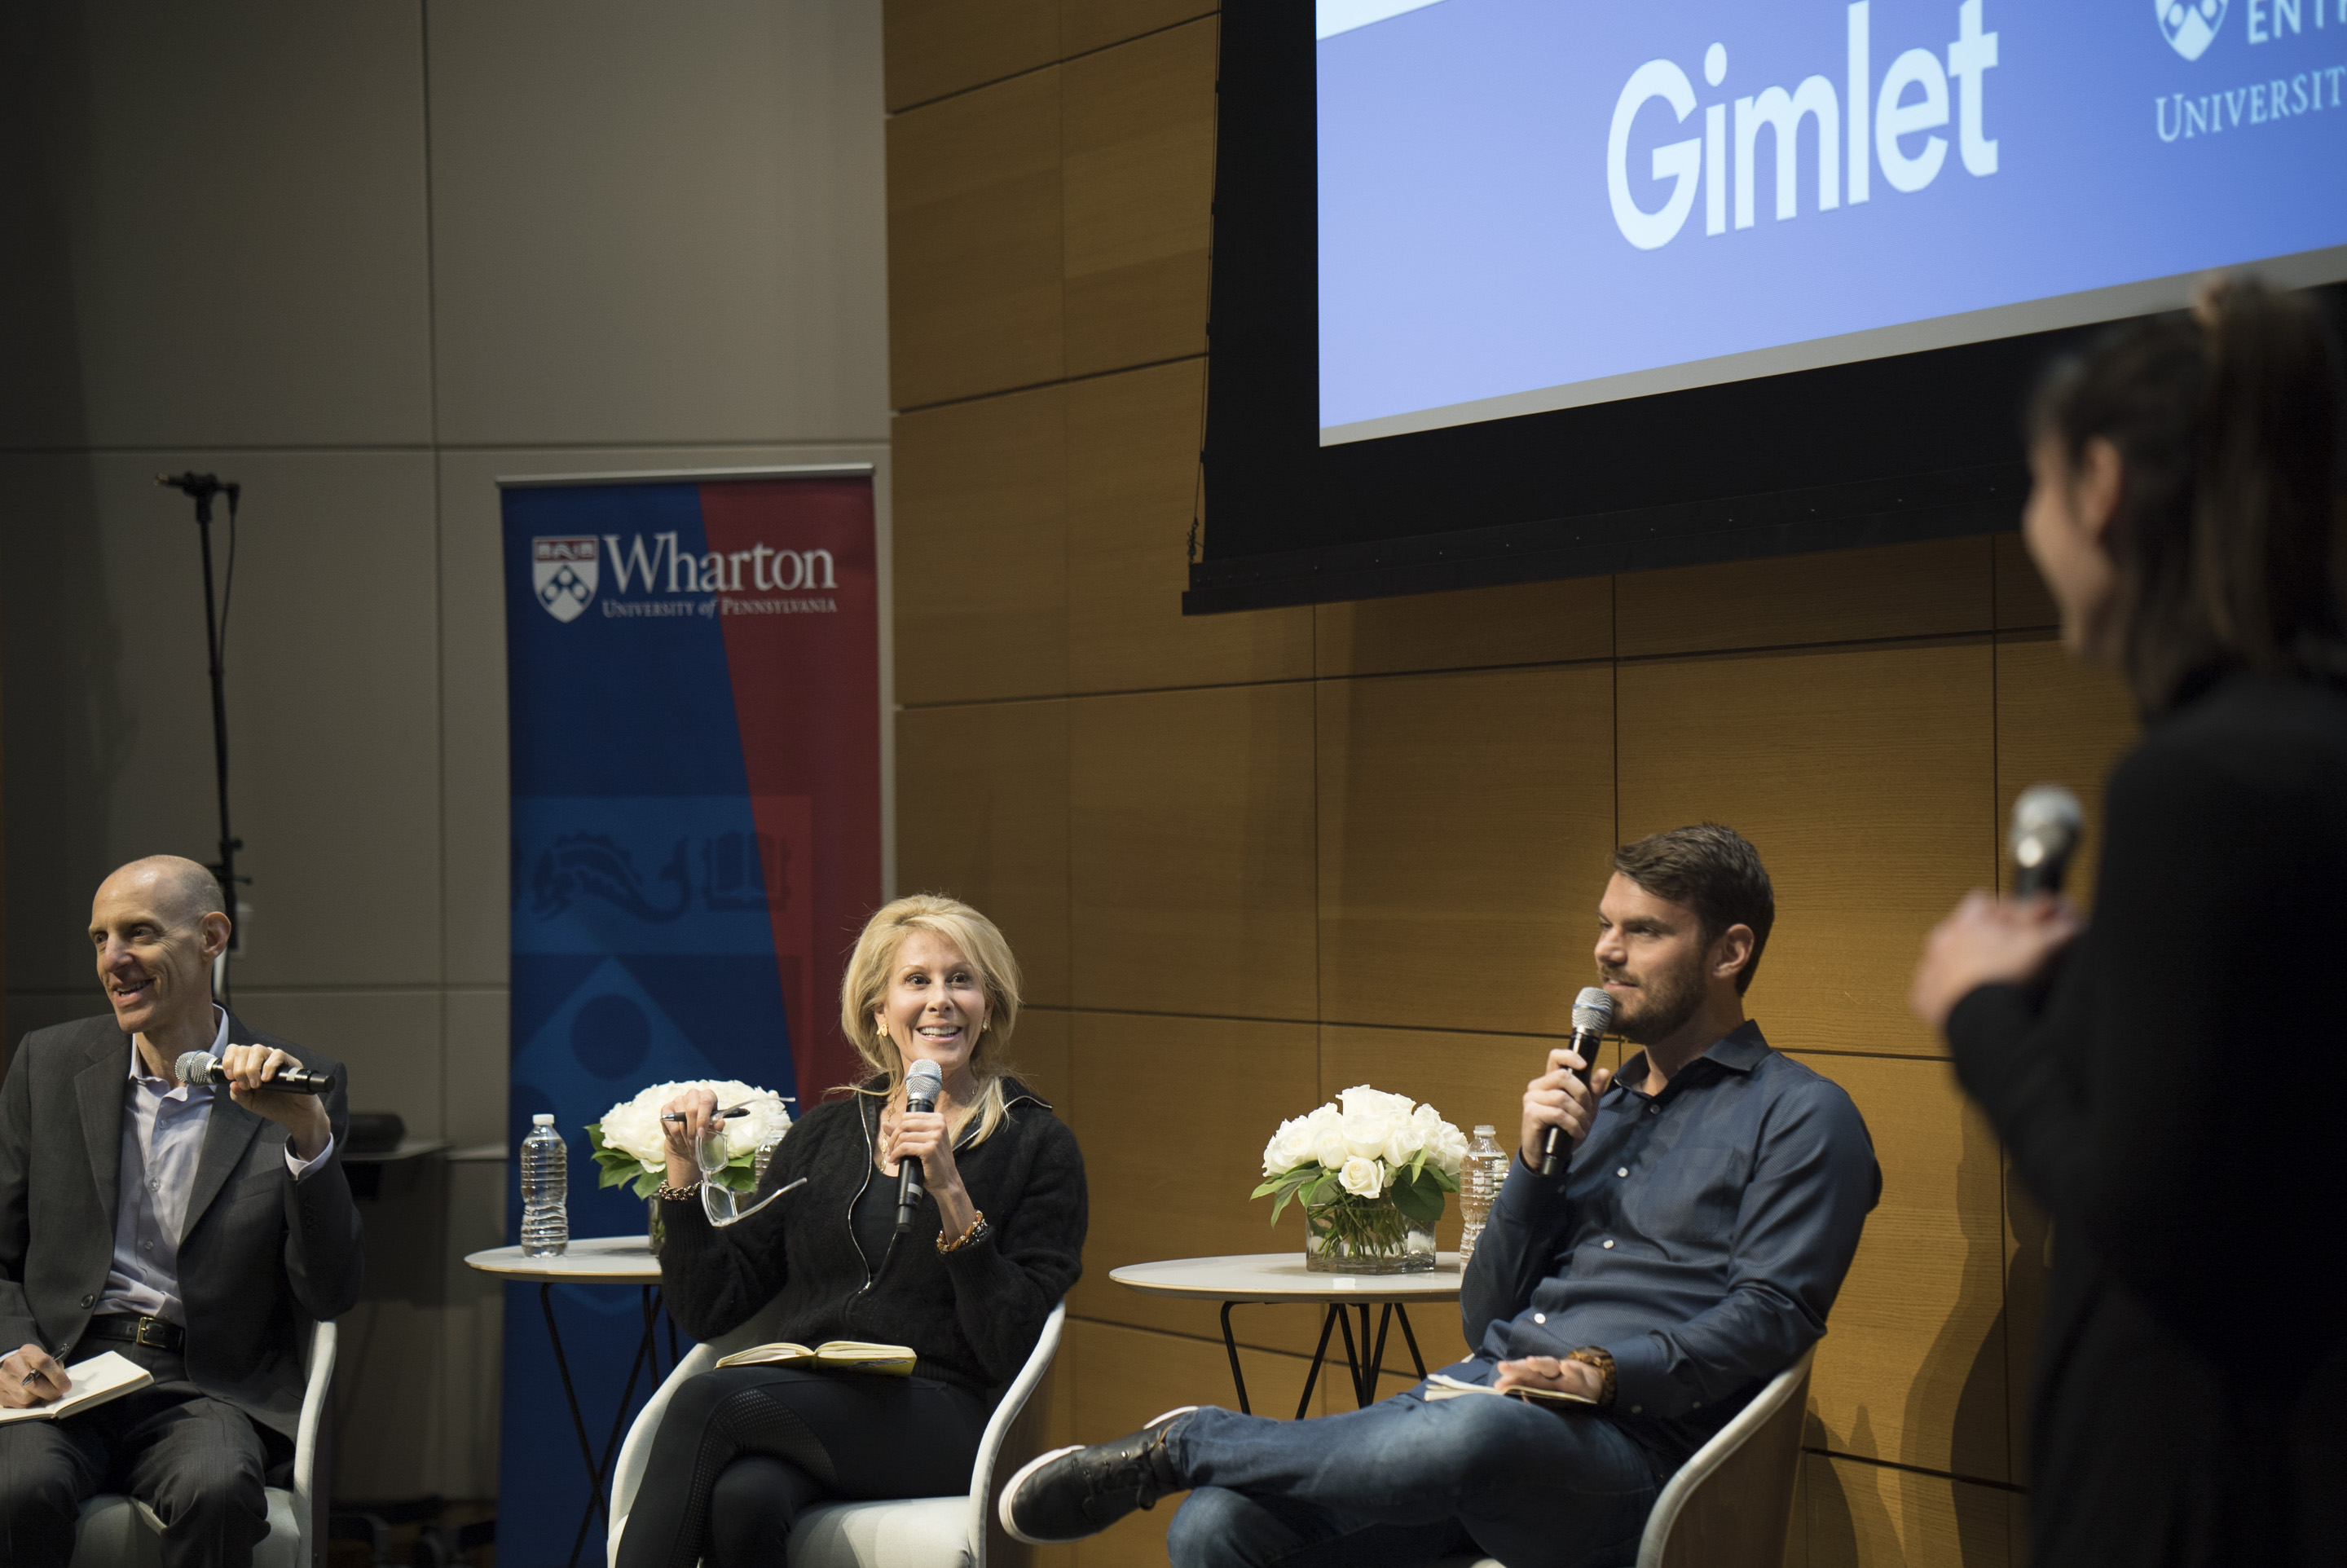 Penn student Katherine Sizov pitches to investors in front of a crowd at Wharton